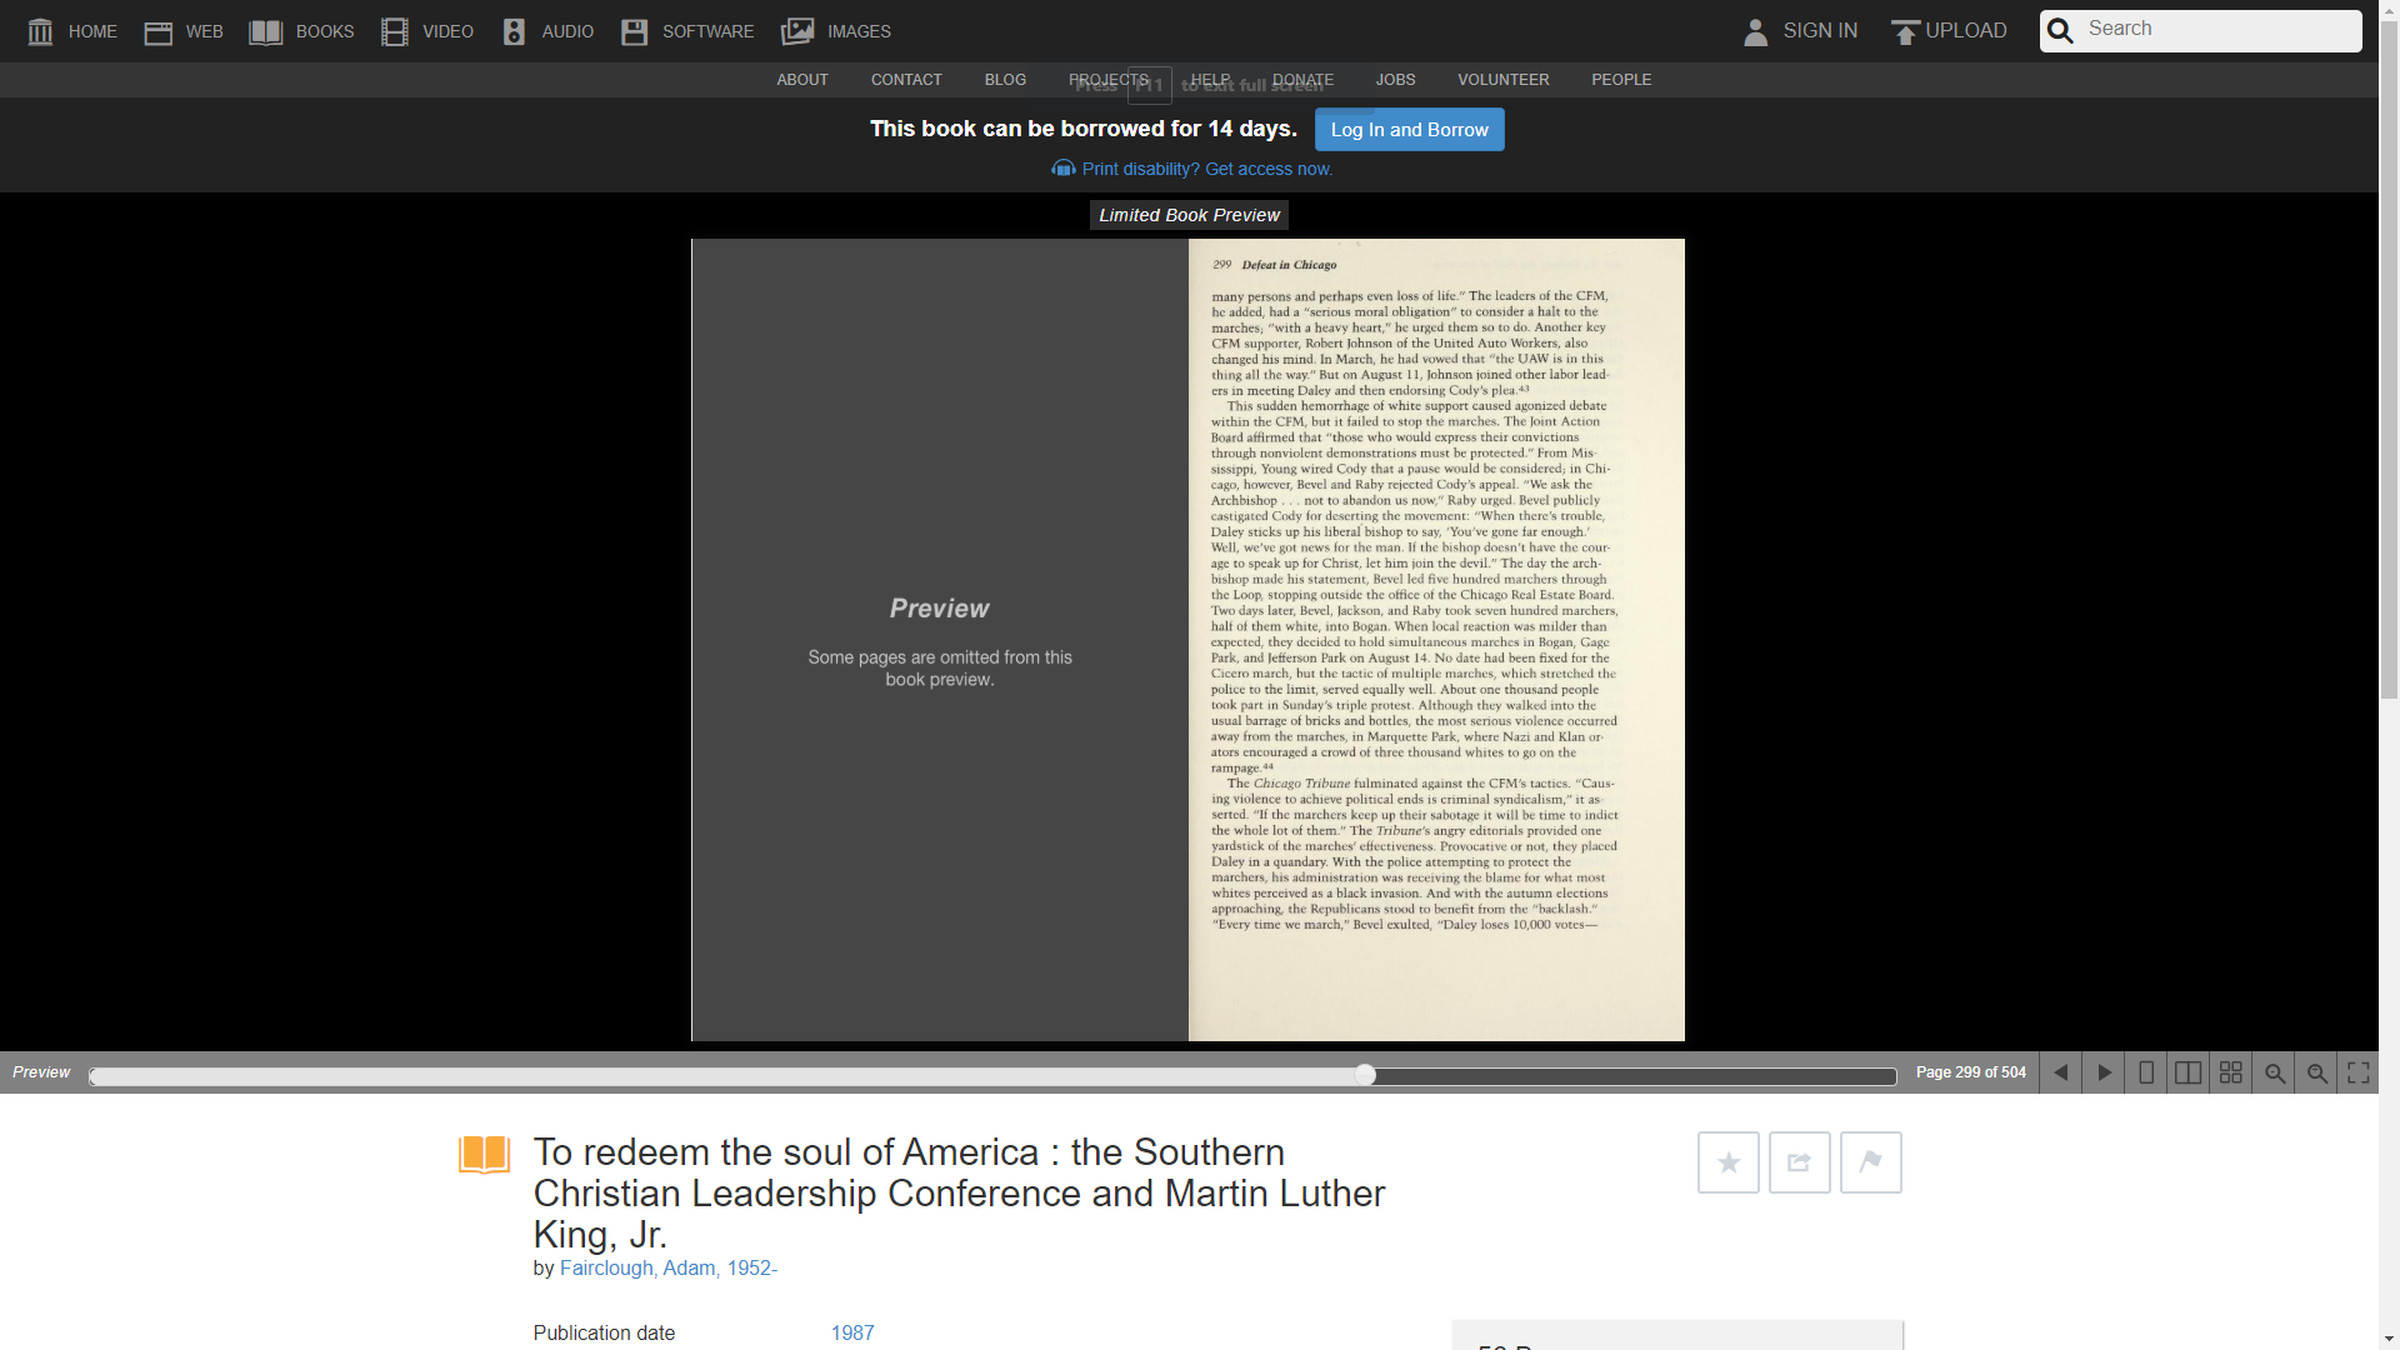 Clicking a compatible citation (for example, from Martin Luther King’s Wikipedia page), brings you to a two-page preview of the book from the Internet Archive.